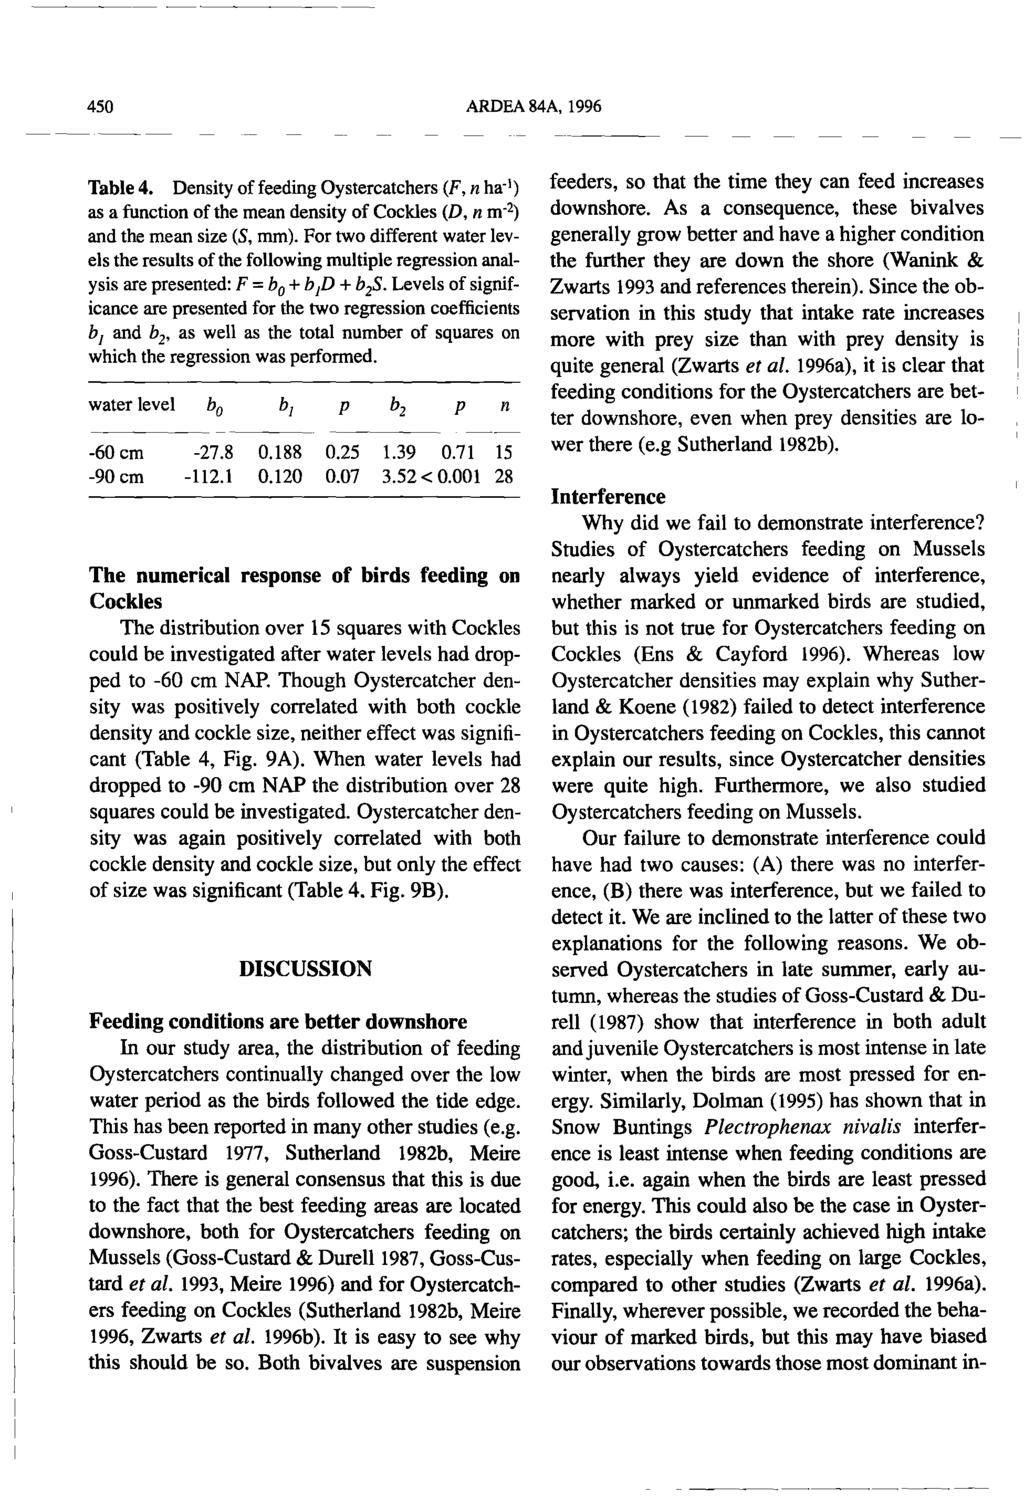 450 ARDA 84A. 1996 Table 4. Density of feeding Oystercatchers (F, n ha 1) as a function of the mean density of Cockles (D, n m 2) and the mean size (S, mm).